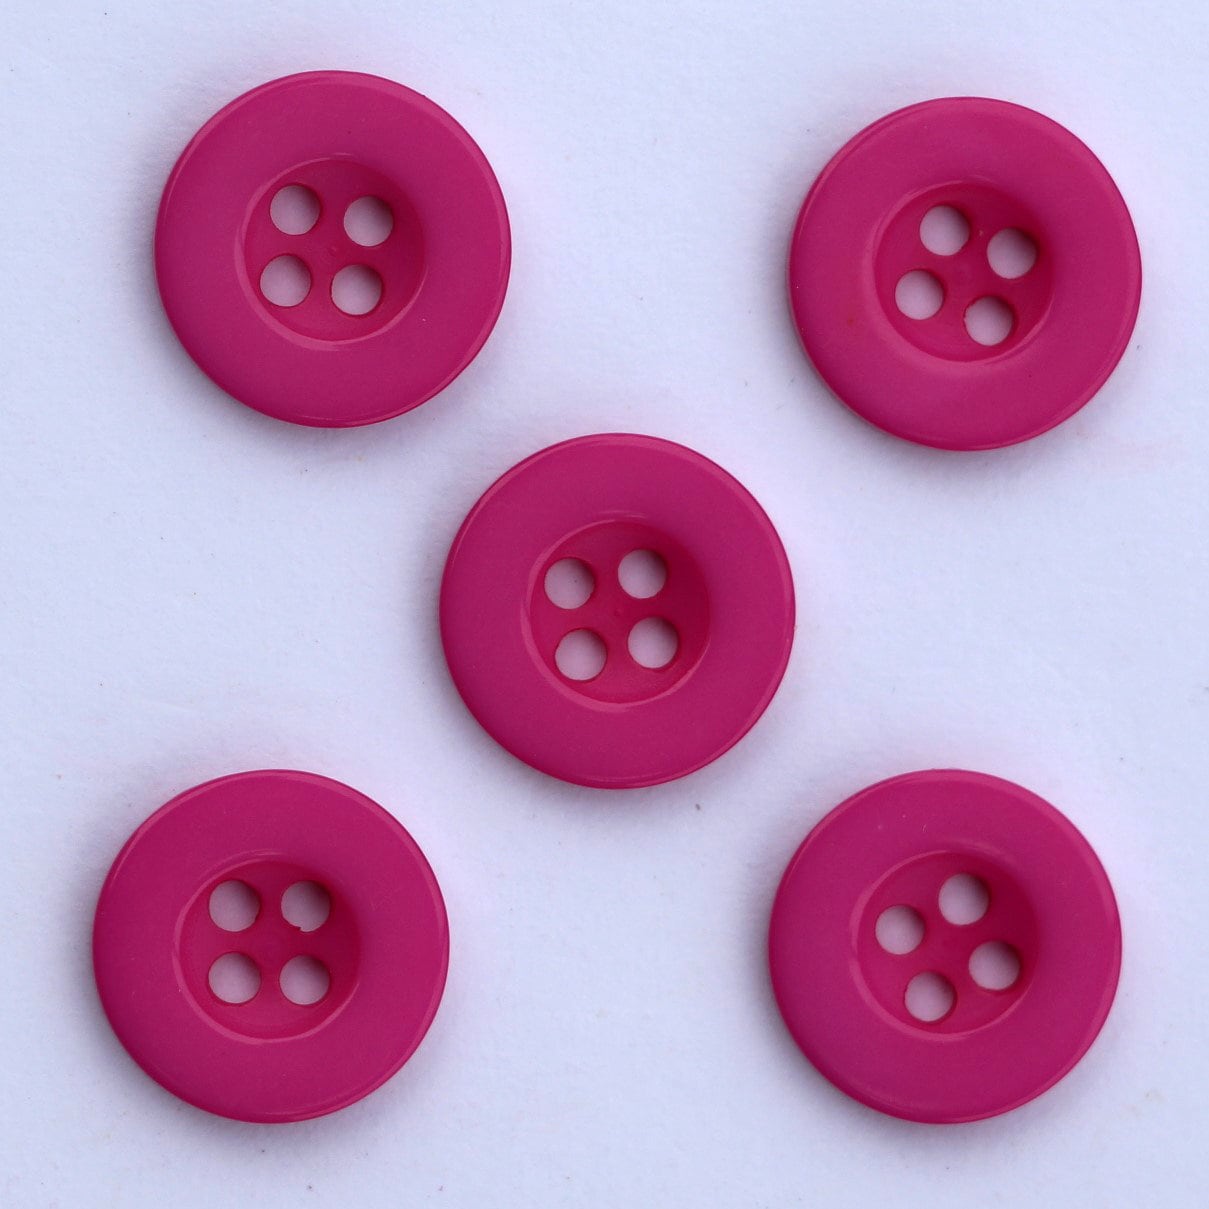 SET OF THREE PINK PLASTIC 1 1/8 DIA. ROUND 2-HOLE SEWING BUTTONS